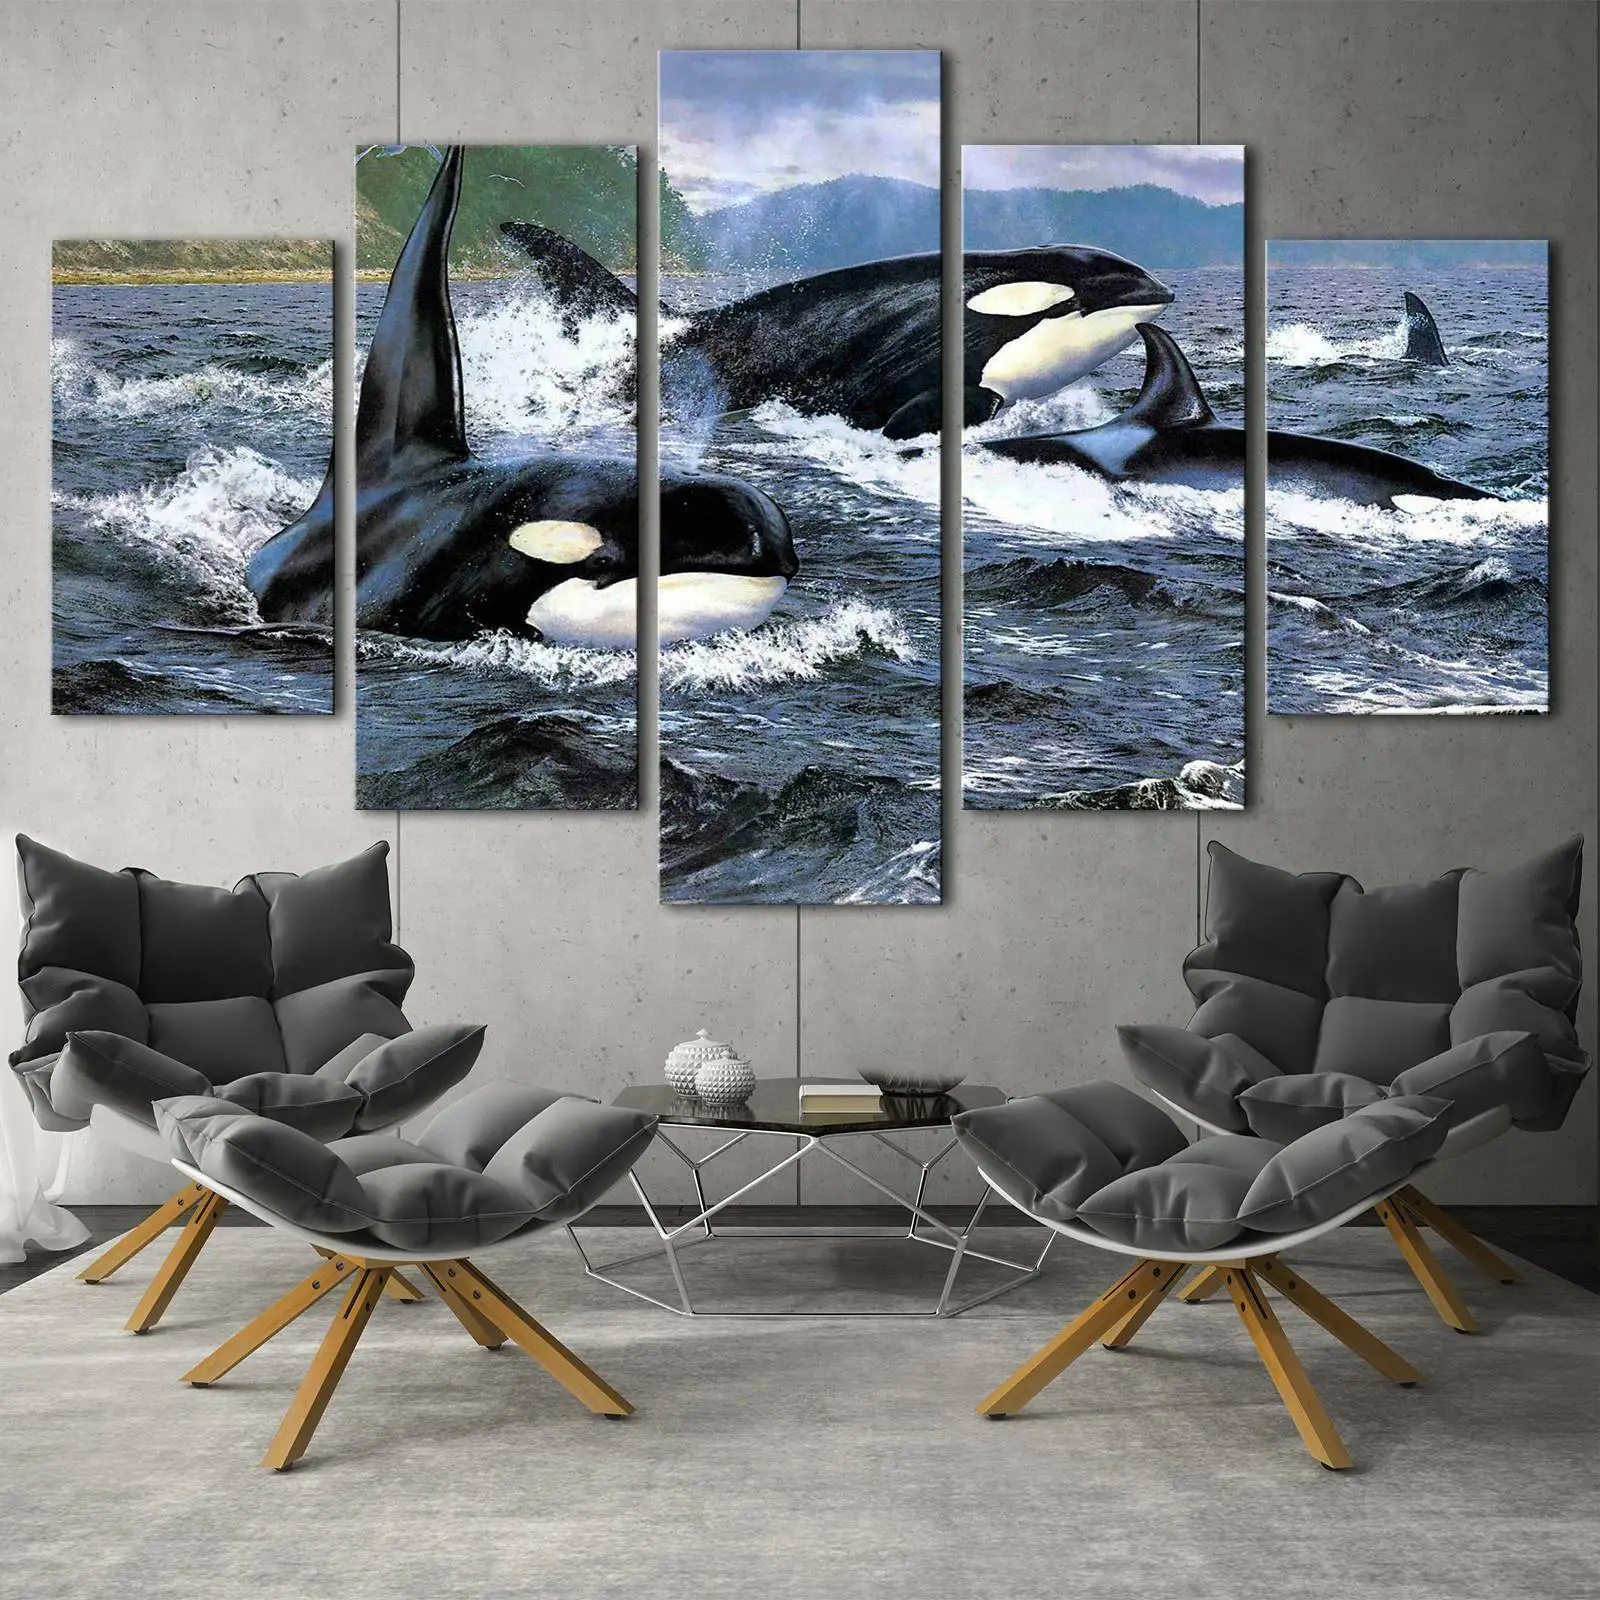 

5 Piece Orca Stration Killer whale Ocean Poster Picture Print Wall Art Canvas Painting Wall Decor for Living Room No Framed